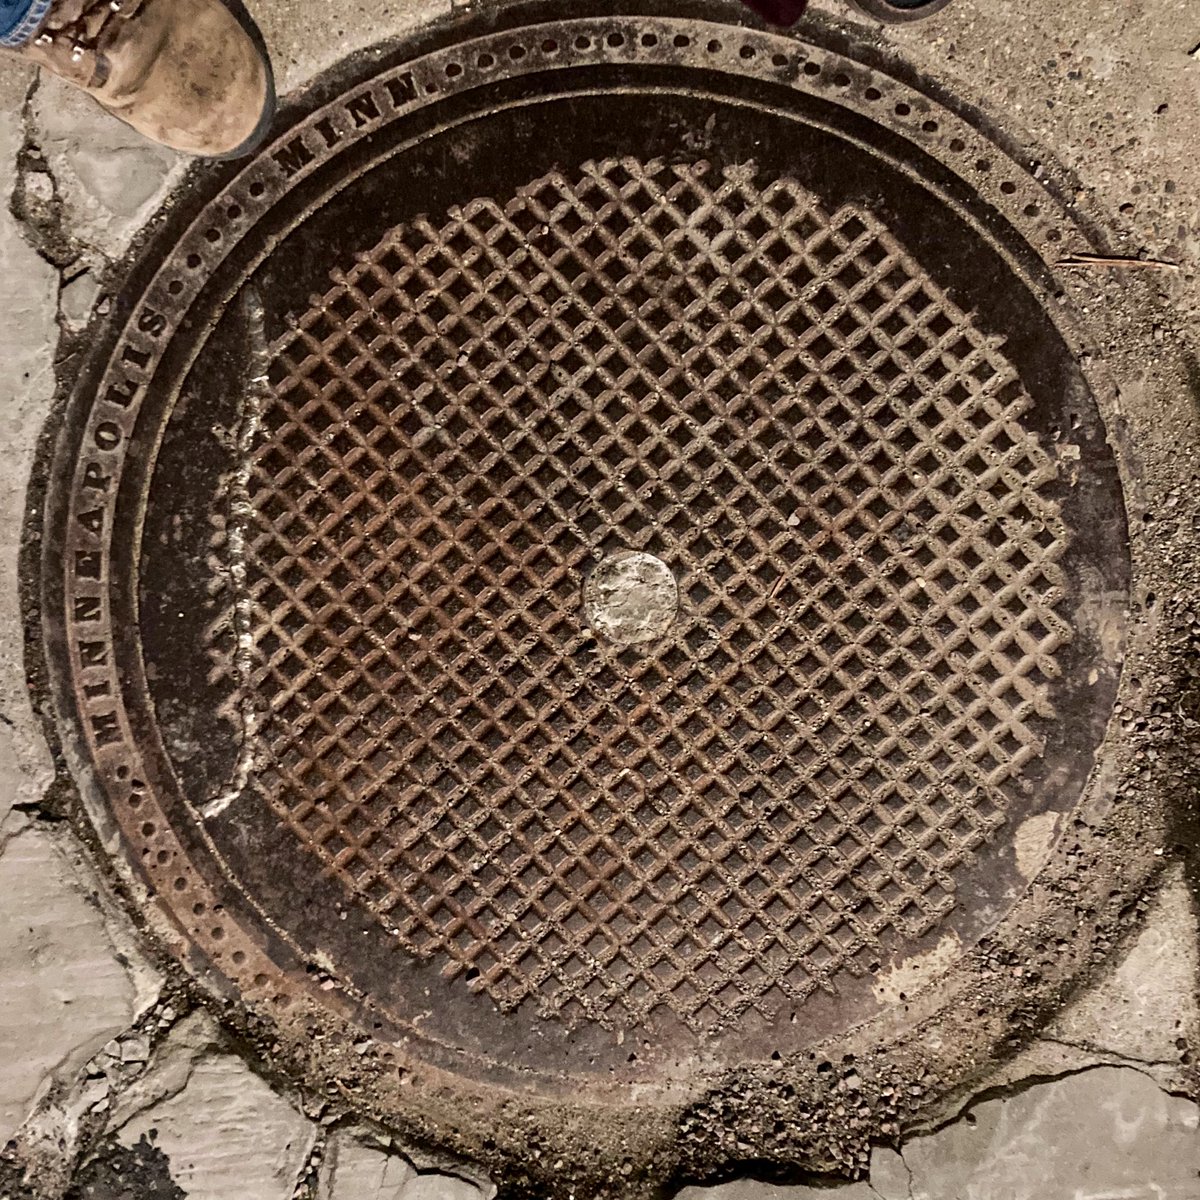 A weld on an old sewer lid. Used to be partly covered with sidewalk concrete, and the theory is that in hammering the concrete off, they damaged the lid as well, necessitating the repair.